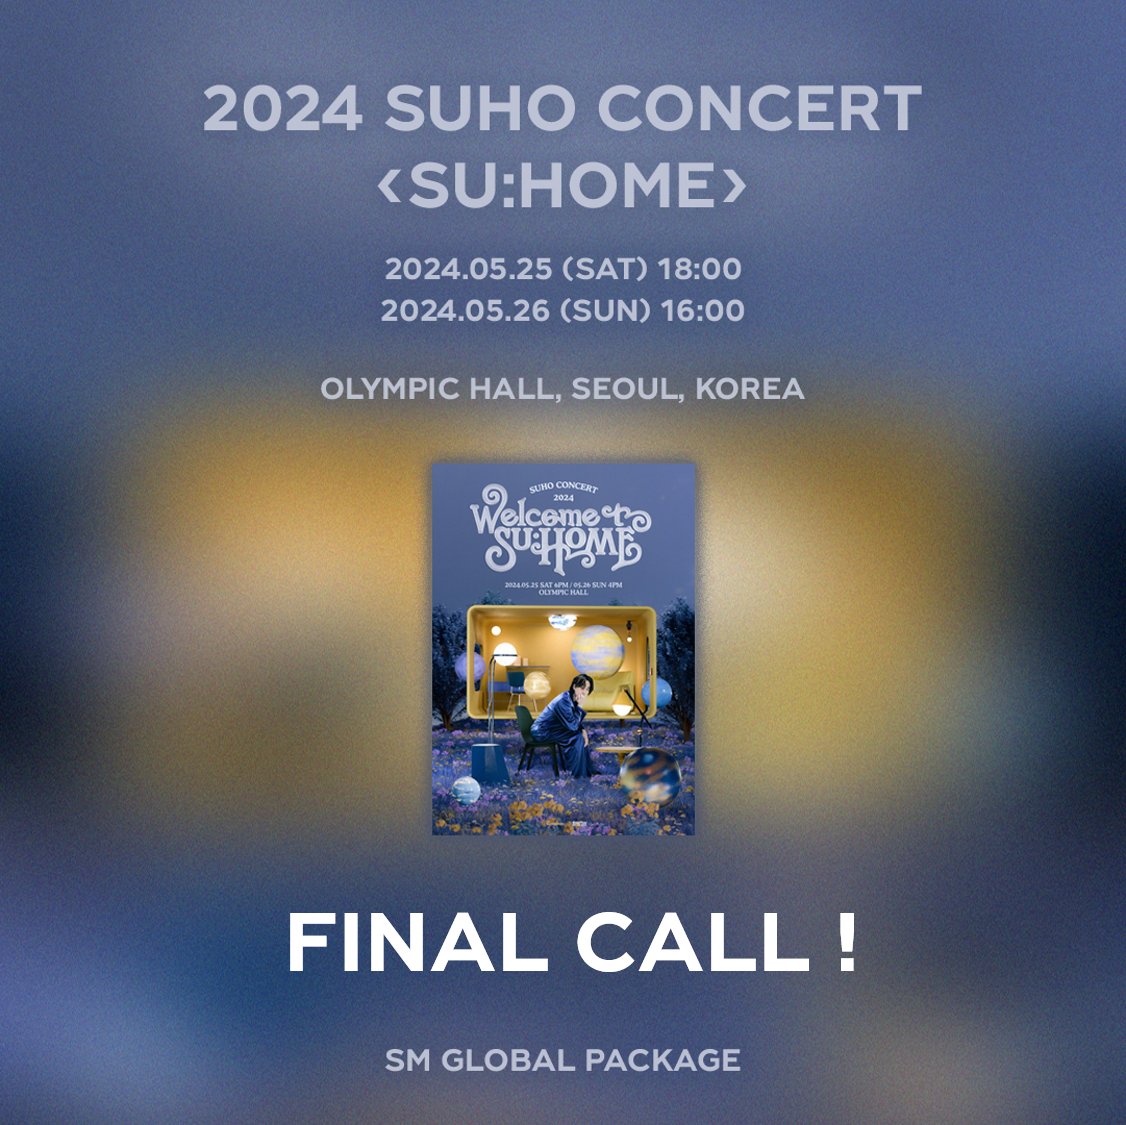 [2024 SUHO CONCERT <SU:HOME>] SM Global Package FINAL CALL !

2024.05.25 (SAT) 18:00
2024.05.26 (SUN) 16:00

🏠global.smtowntravel.com

#SUHO #EXO
#SUHOME
#SMGLOBALPACKAGE 
#GLOBALPACKAGE #全球套餐 #グロパ